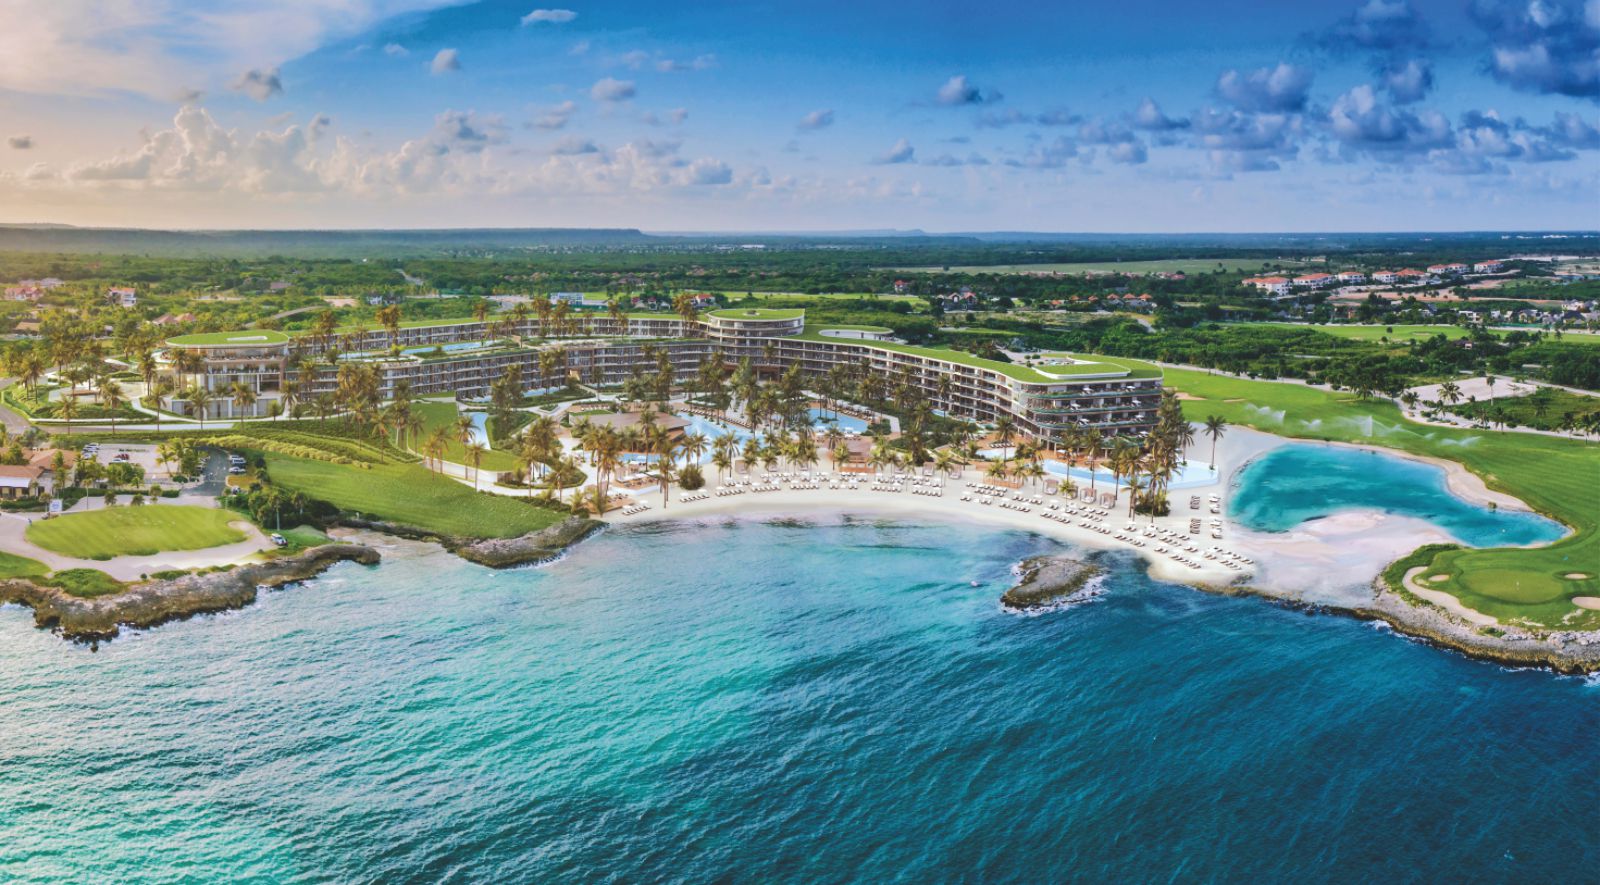 The Residences at The St. Regis Cap Cana